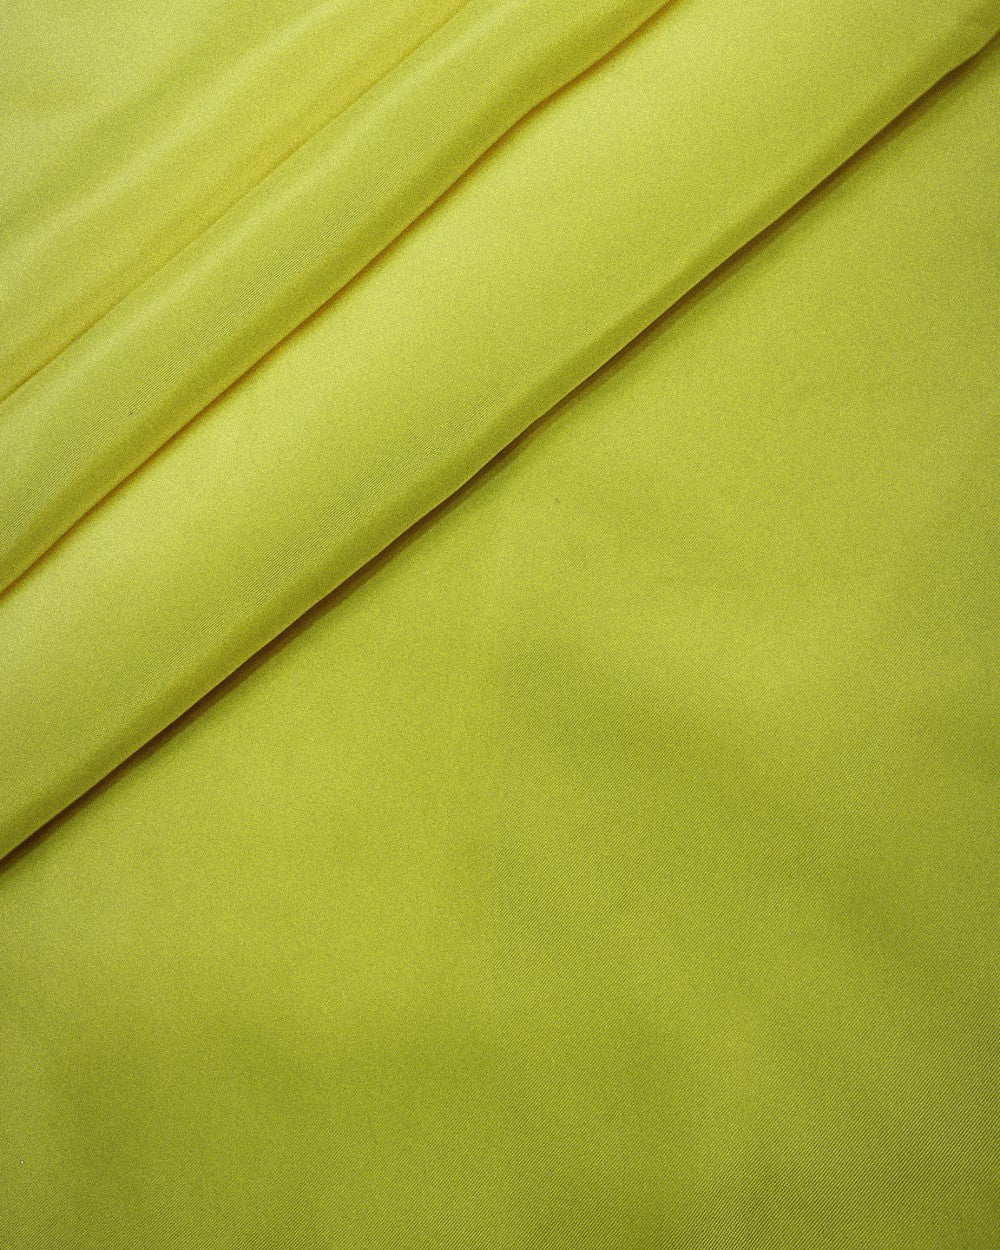 Plain French Light Yellow Colour 42 Inches Width